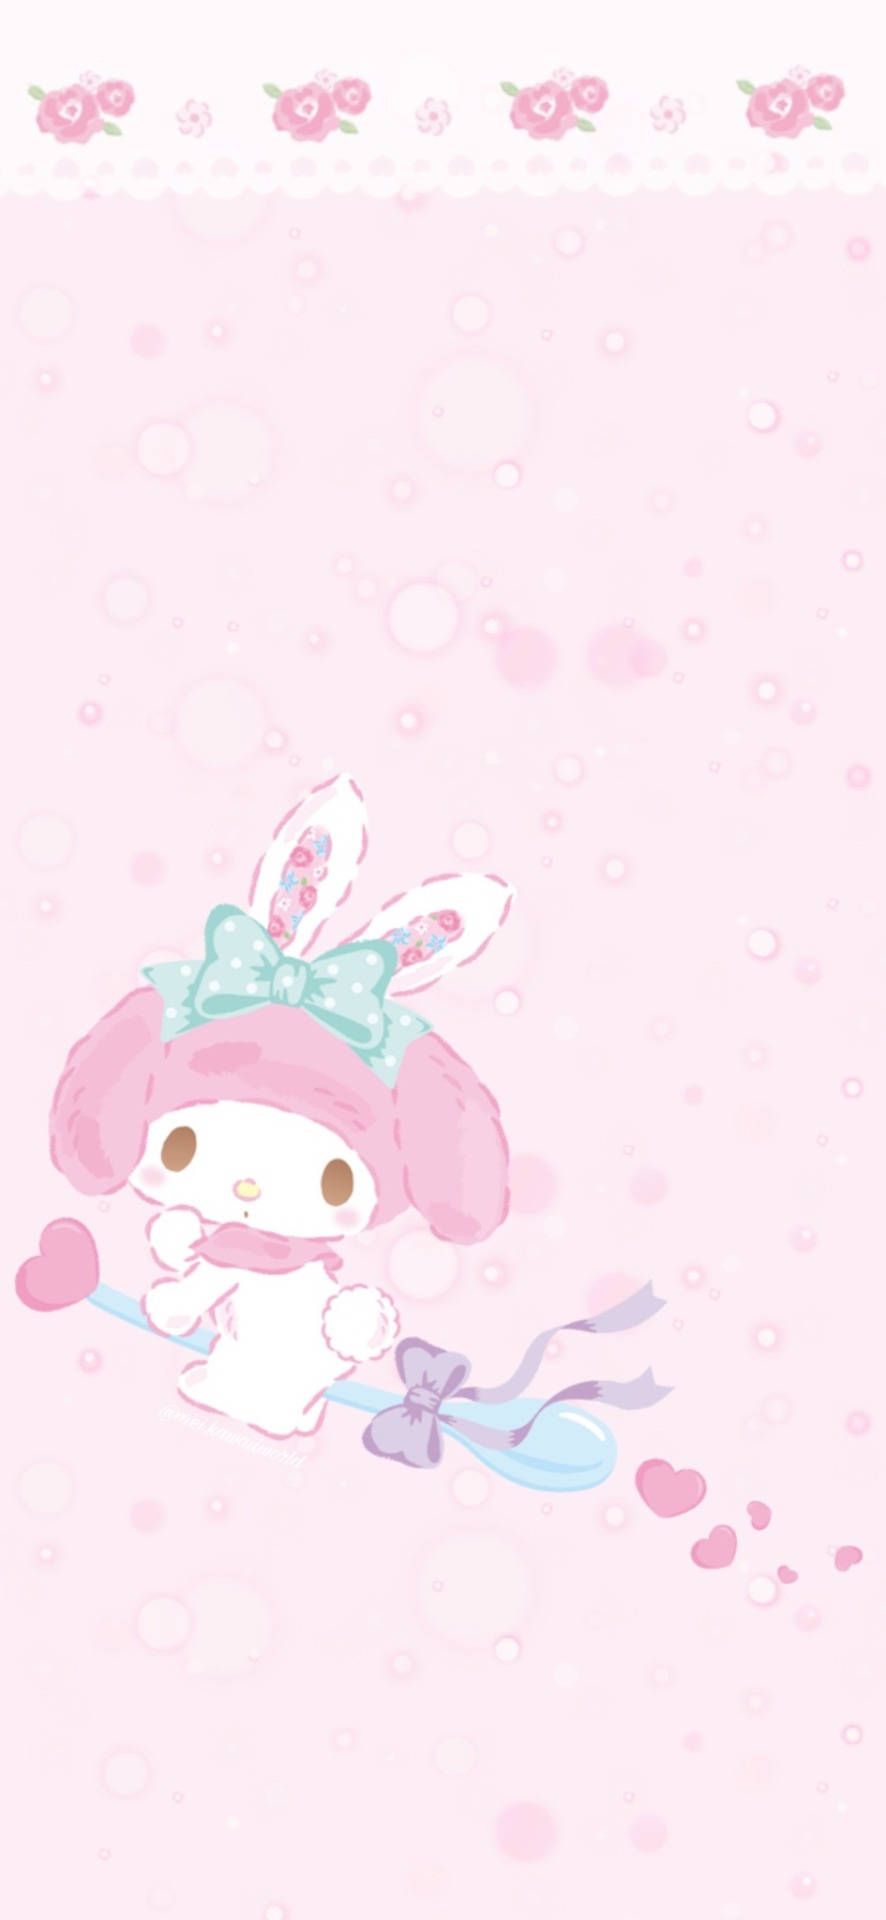 My Melody Riding A Spoon Background